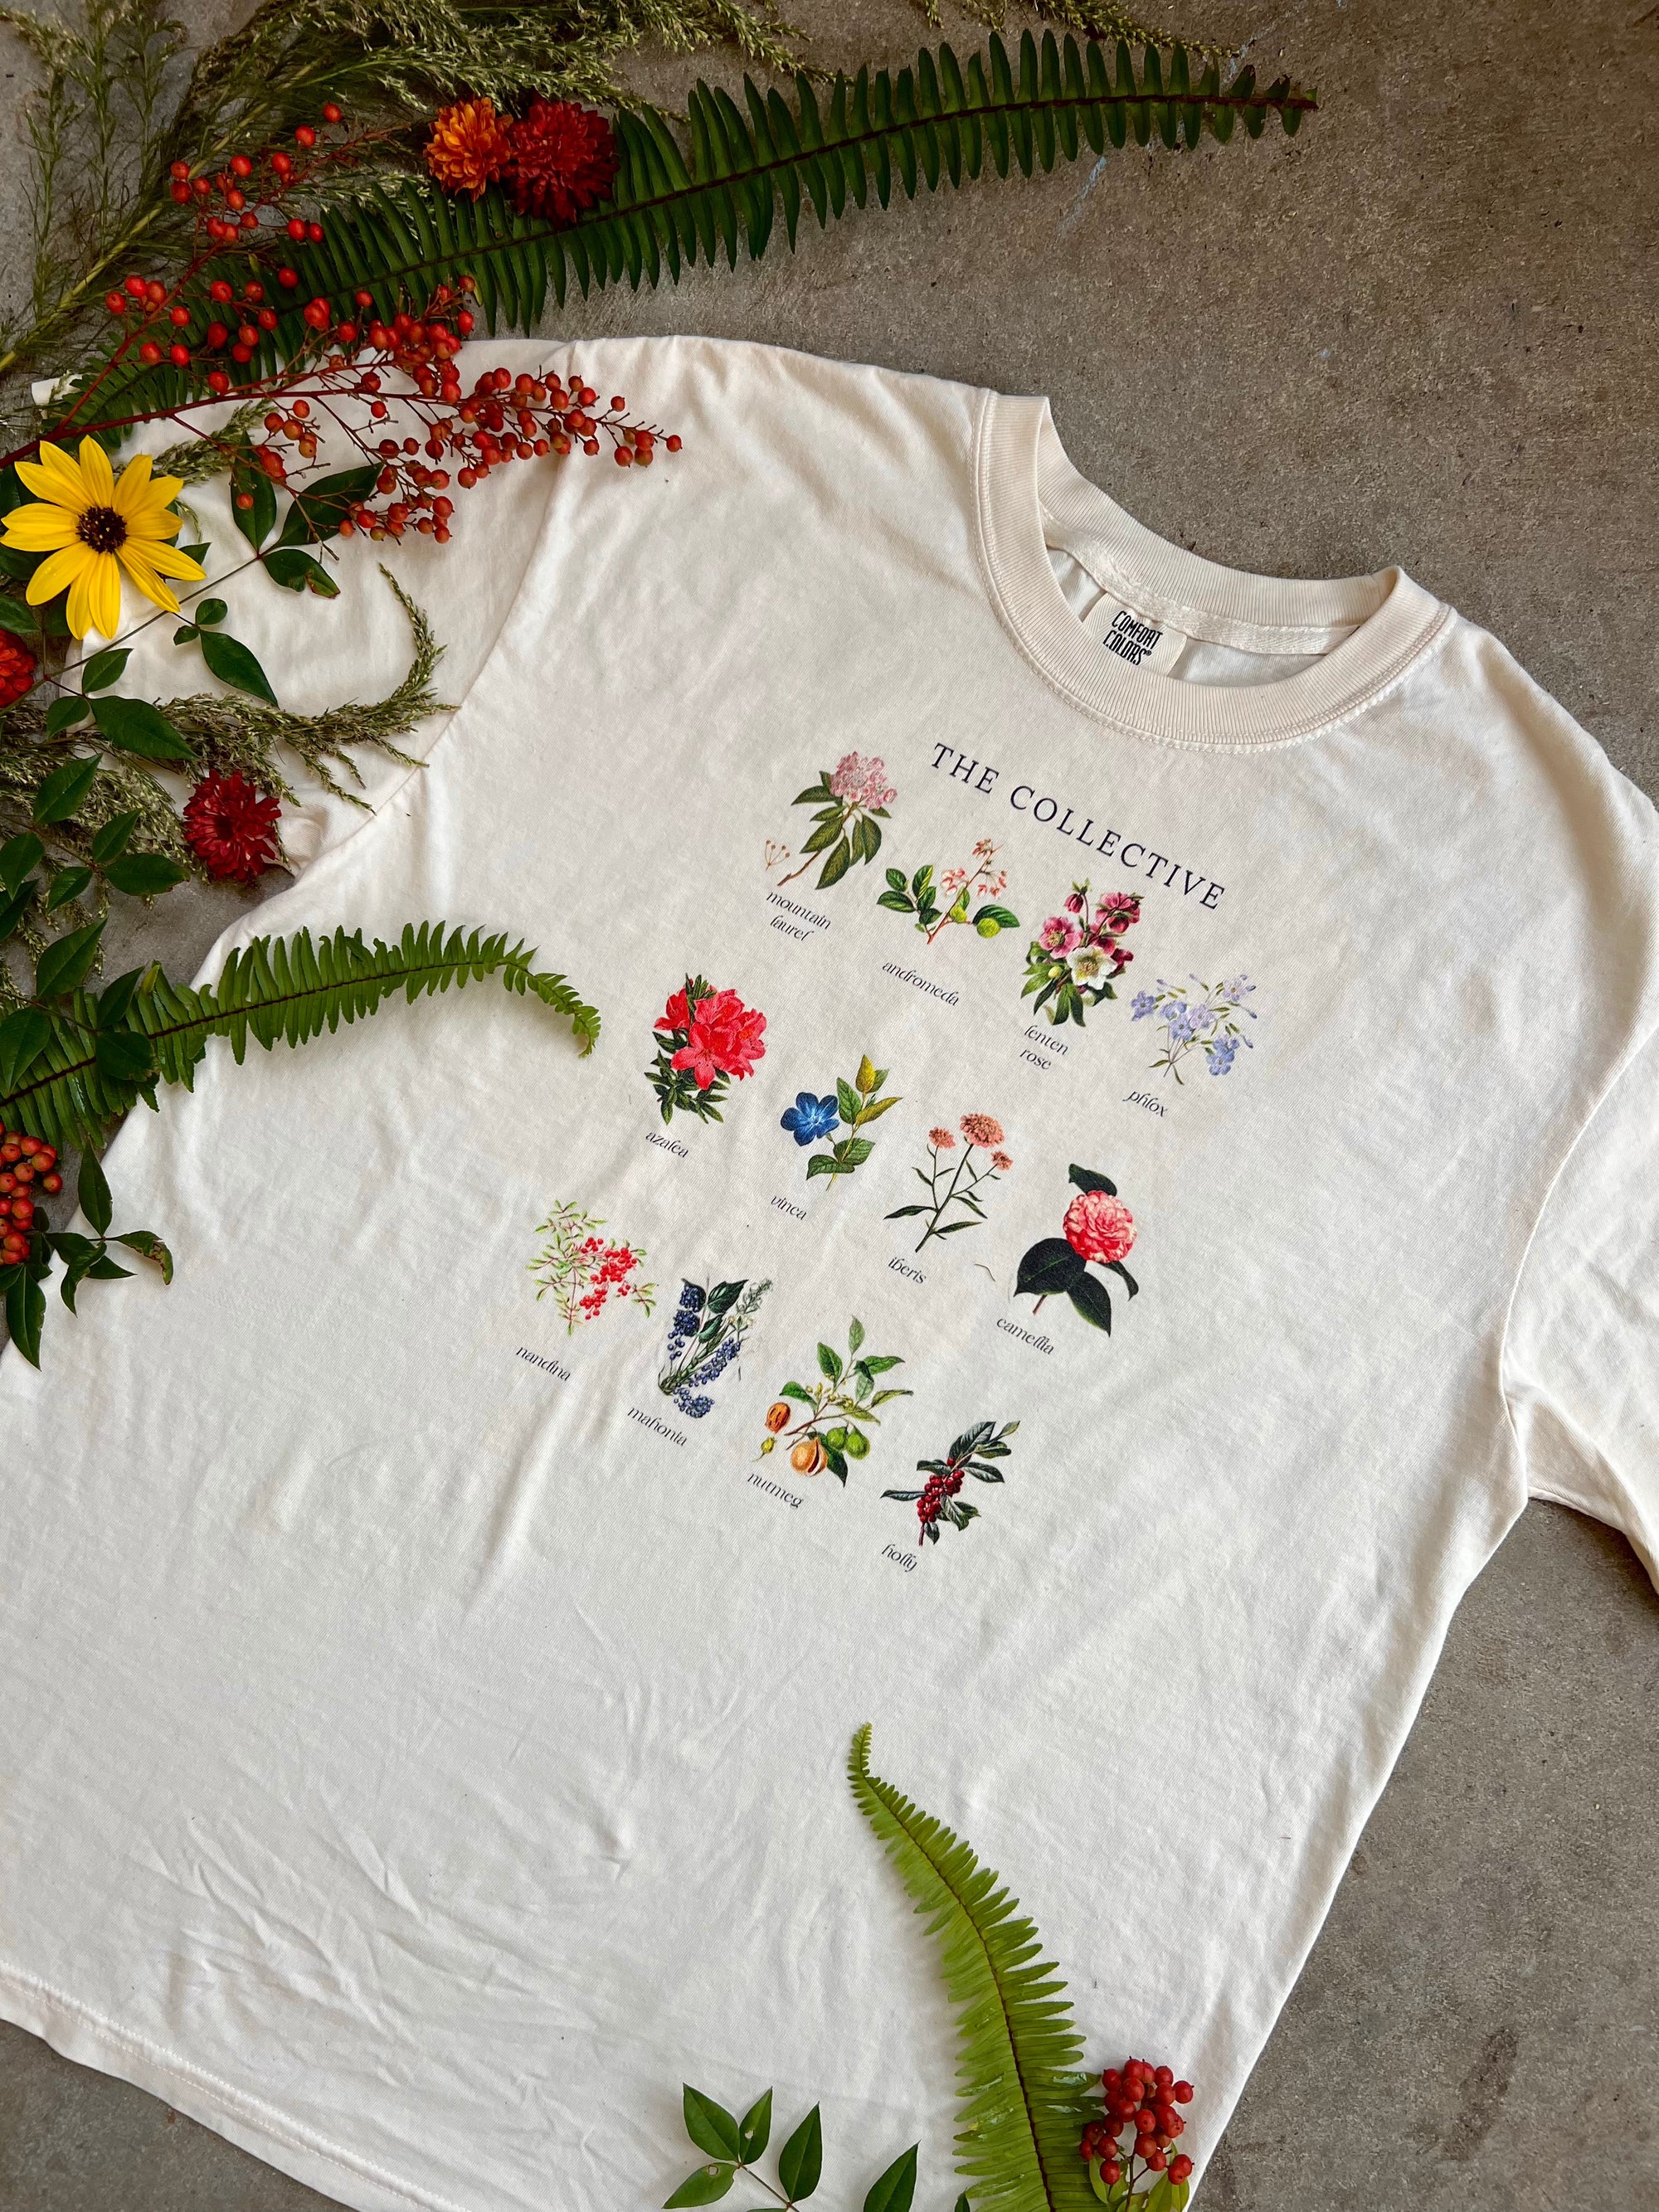 the Evergreen Collective shirt